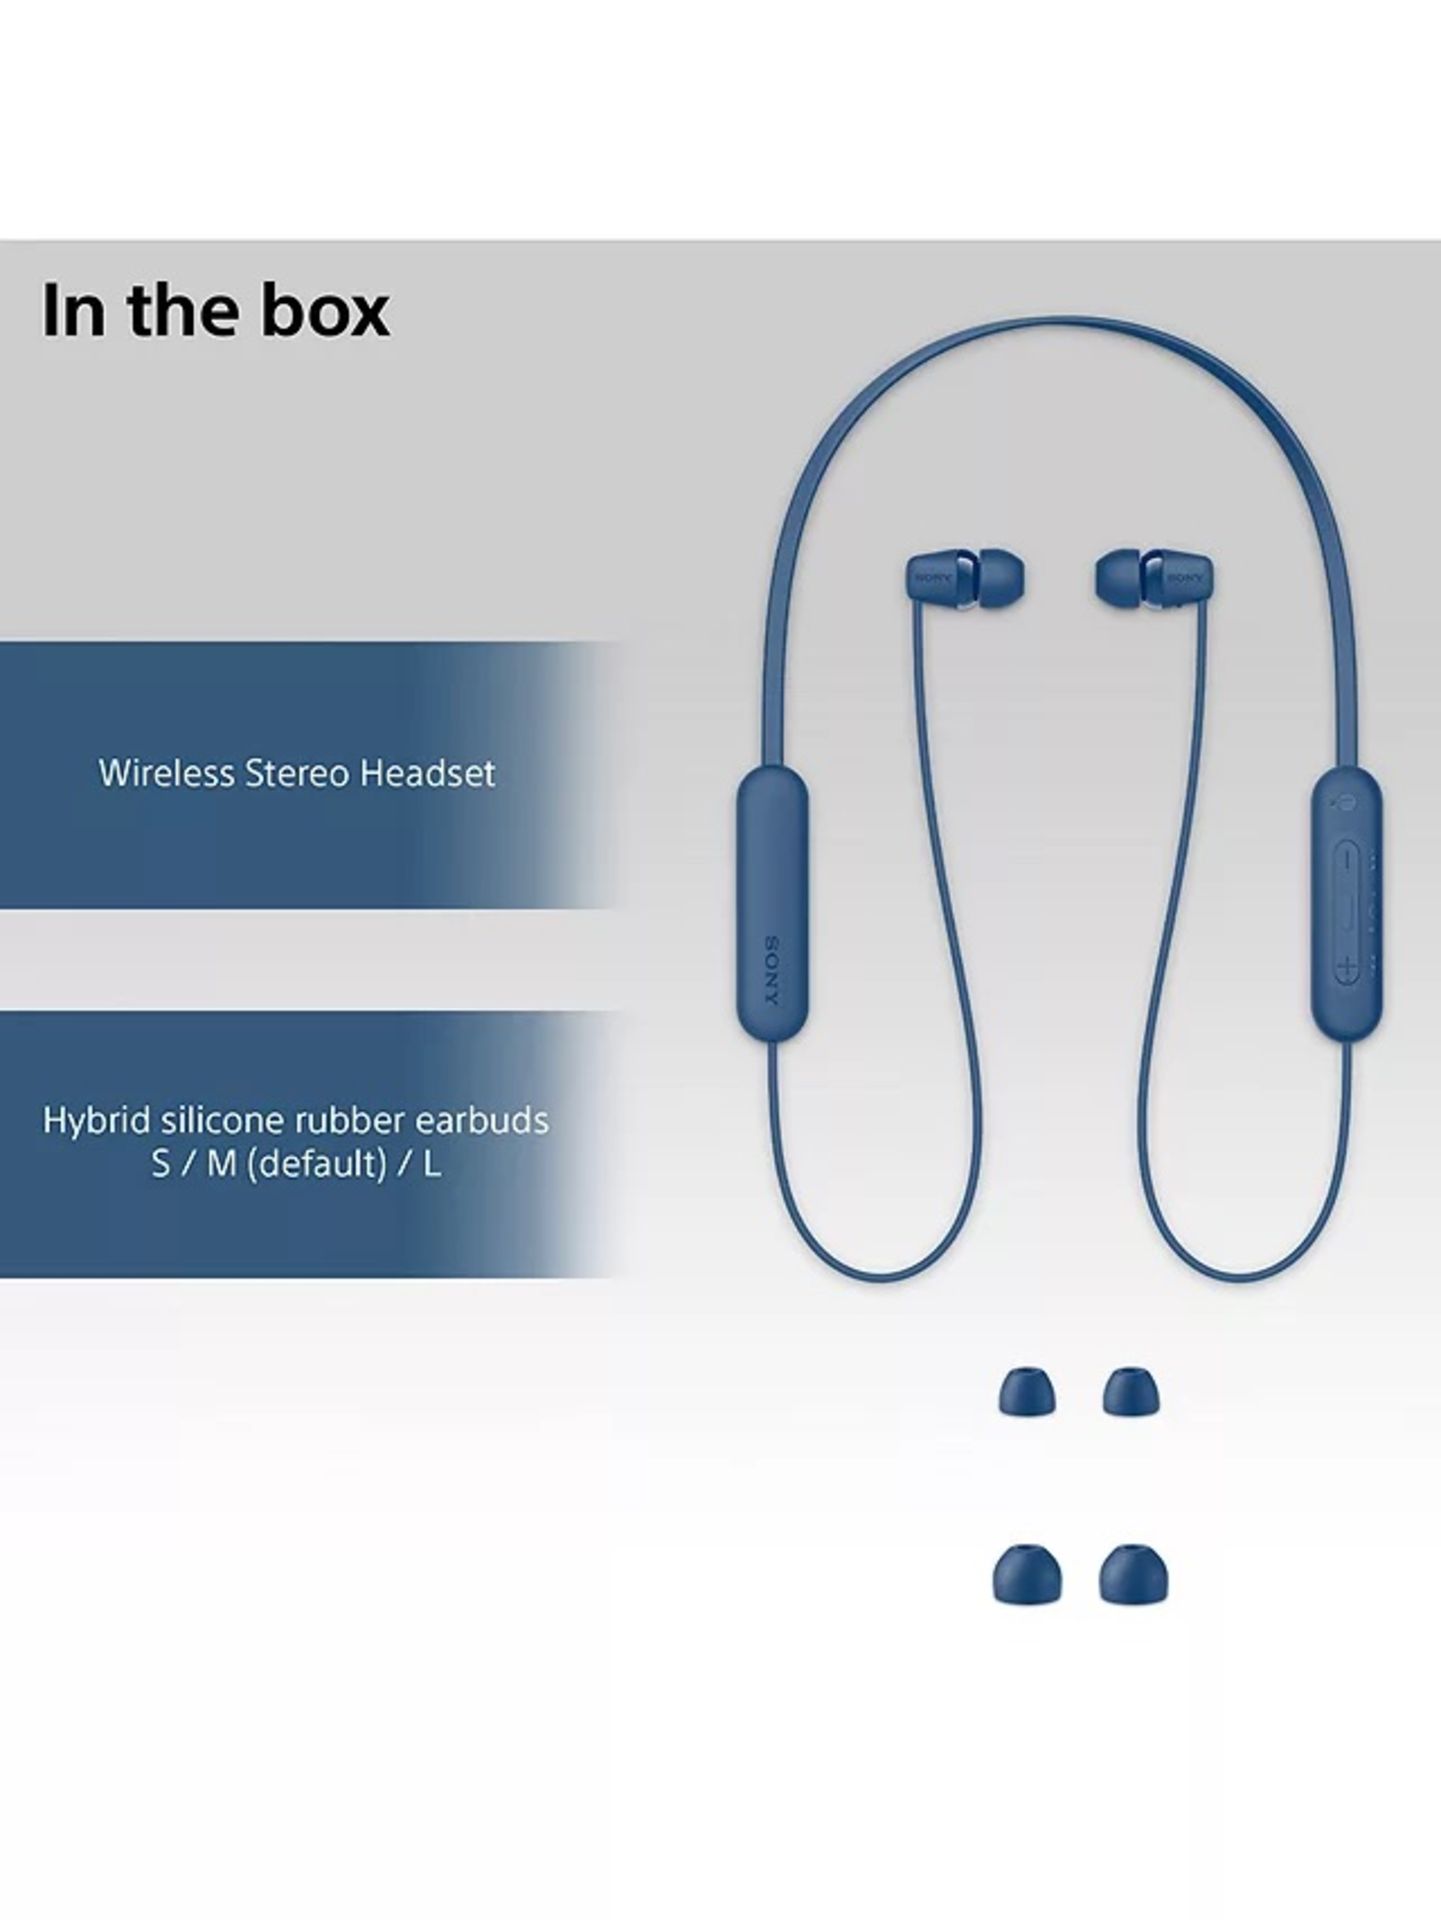 SONY WI-C100 BLUETOOTH WIRELESS IN-EAR HEADPHONES WITH MIC/REMOTE IN BLUE - RRP £35 - Image 6 of 6